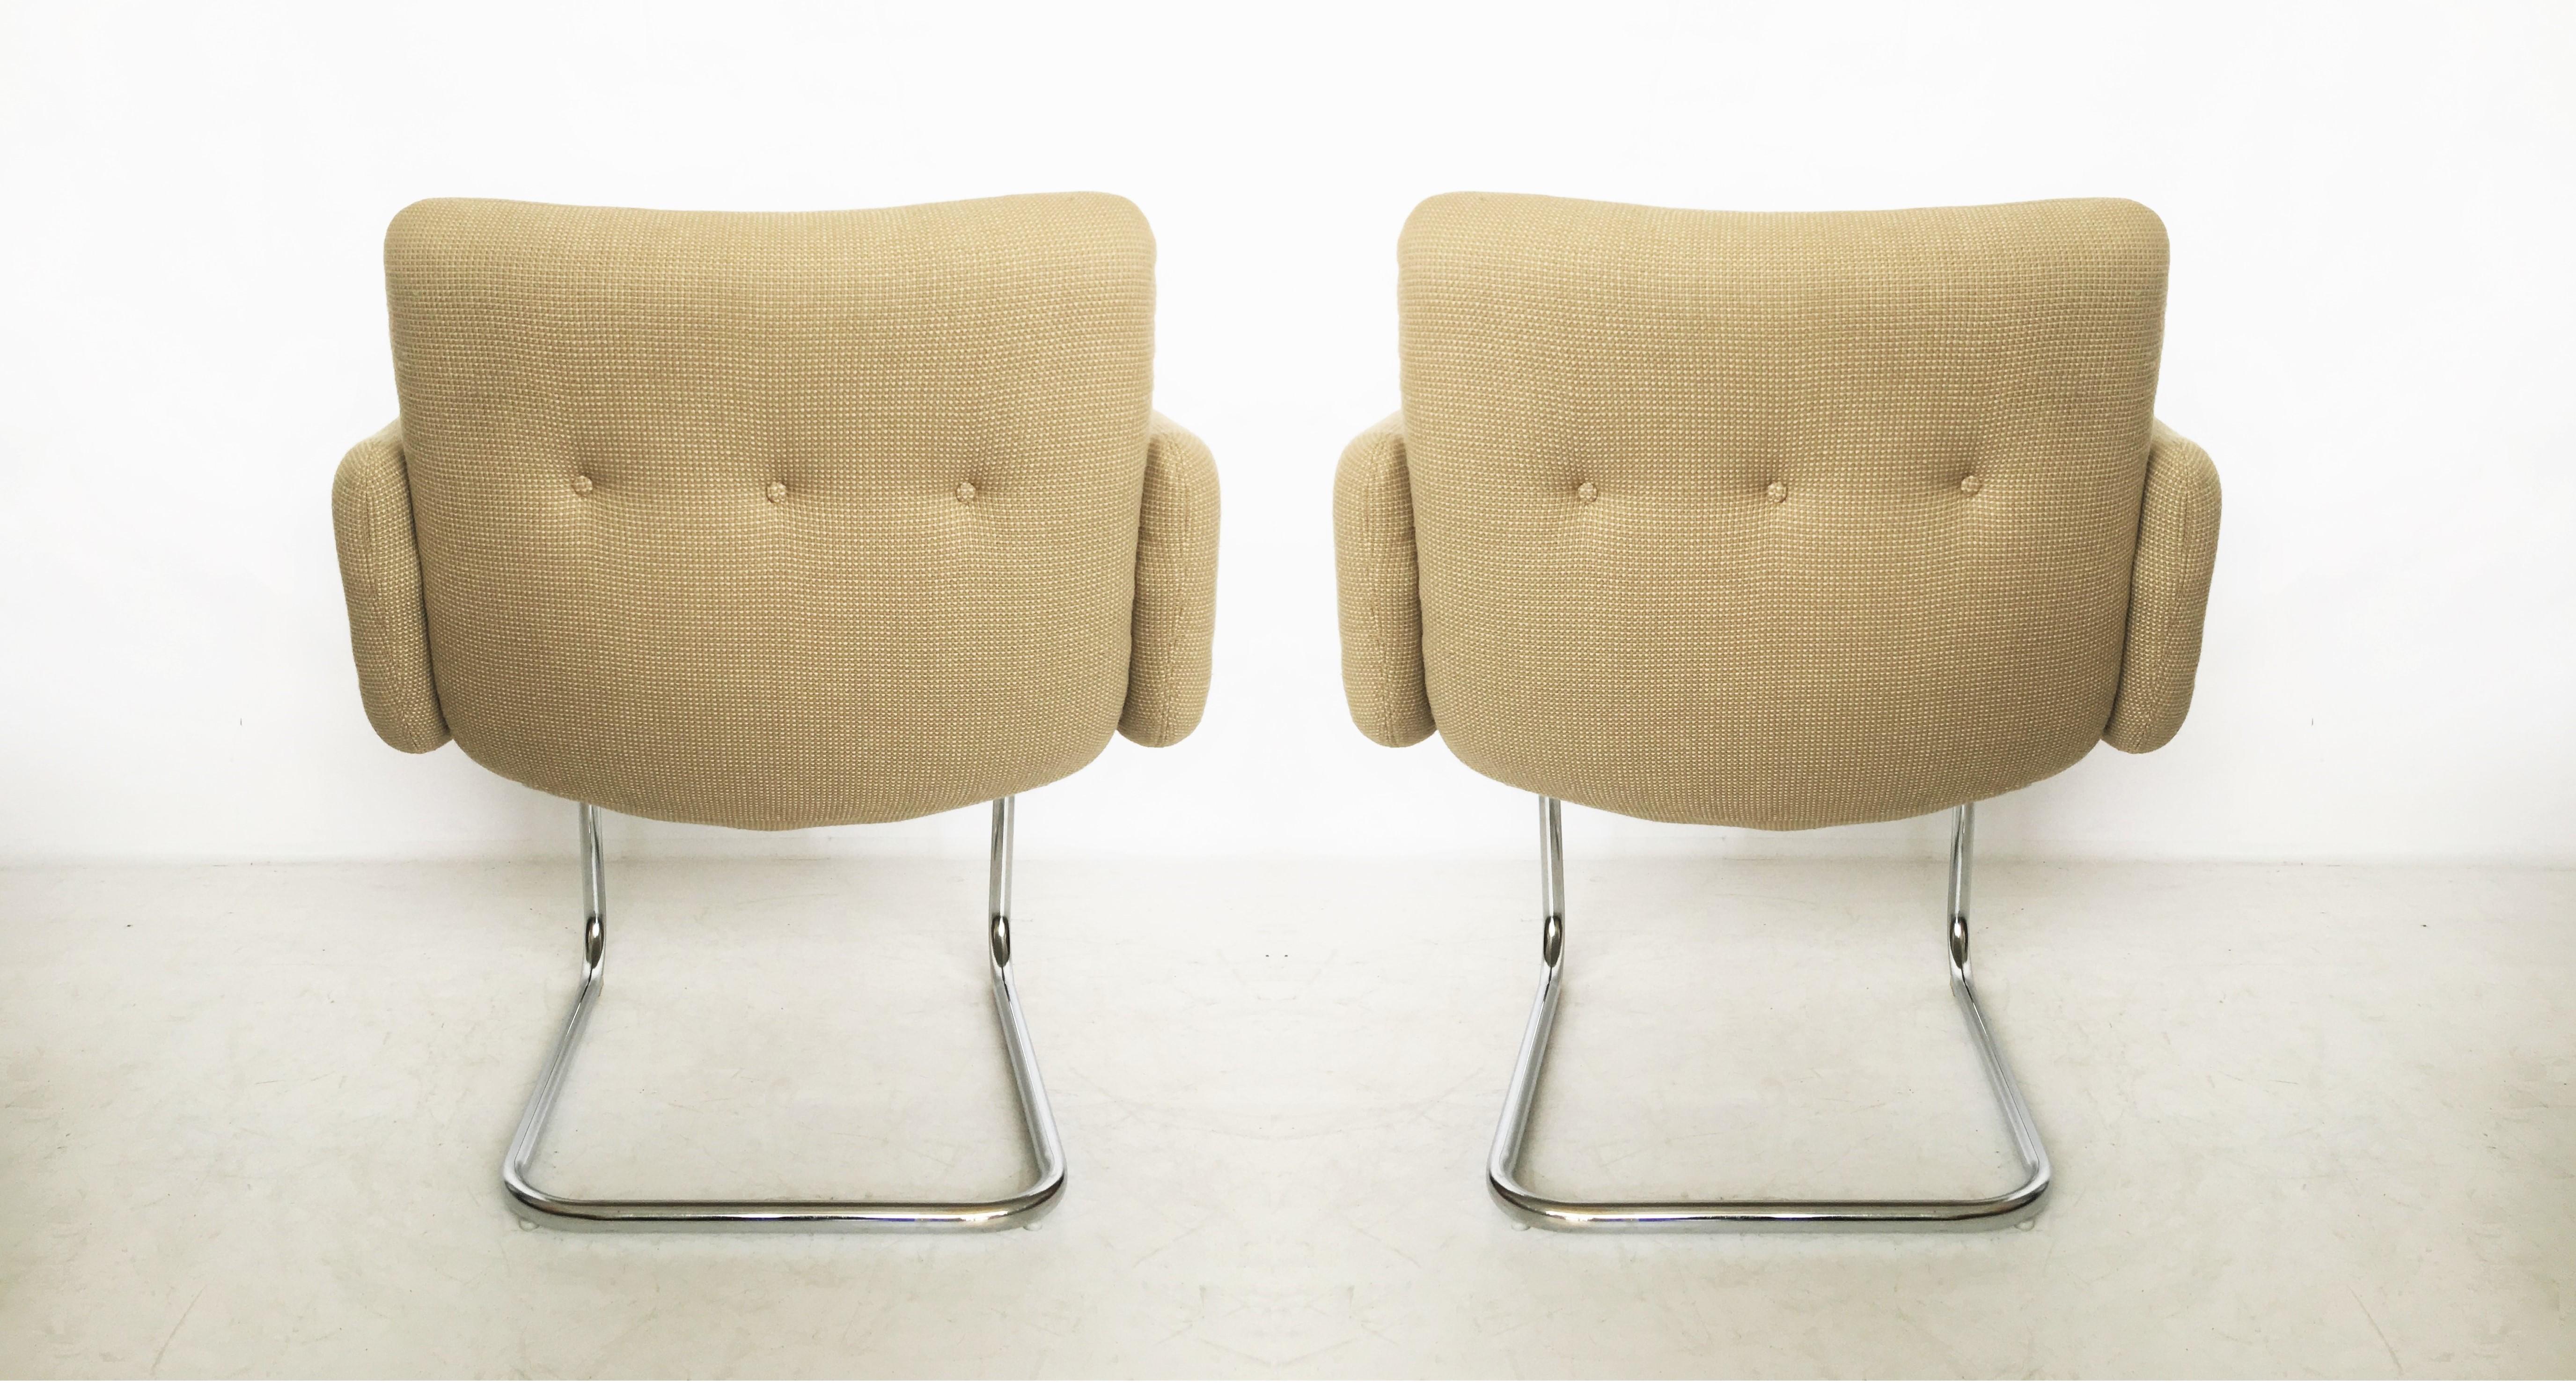 Upholstery Pair of Mid-Century Modern Harvey Probber Cantilevered Chairs For Sale